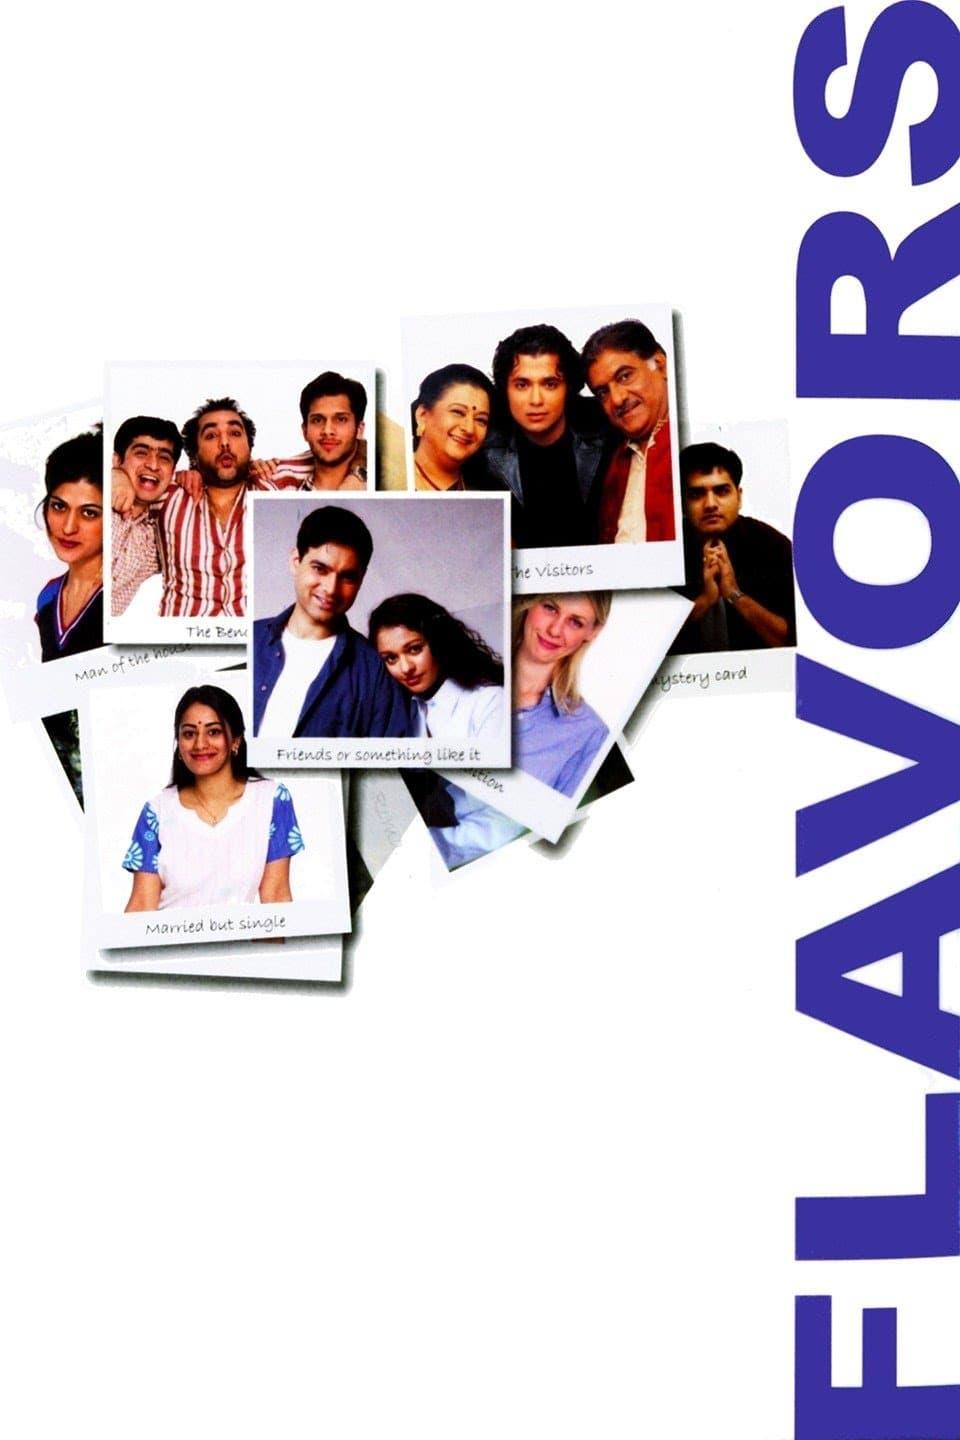 Flavors poster